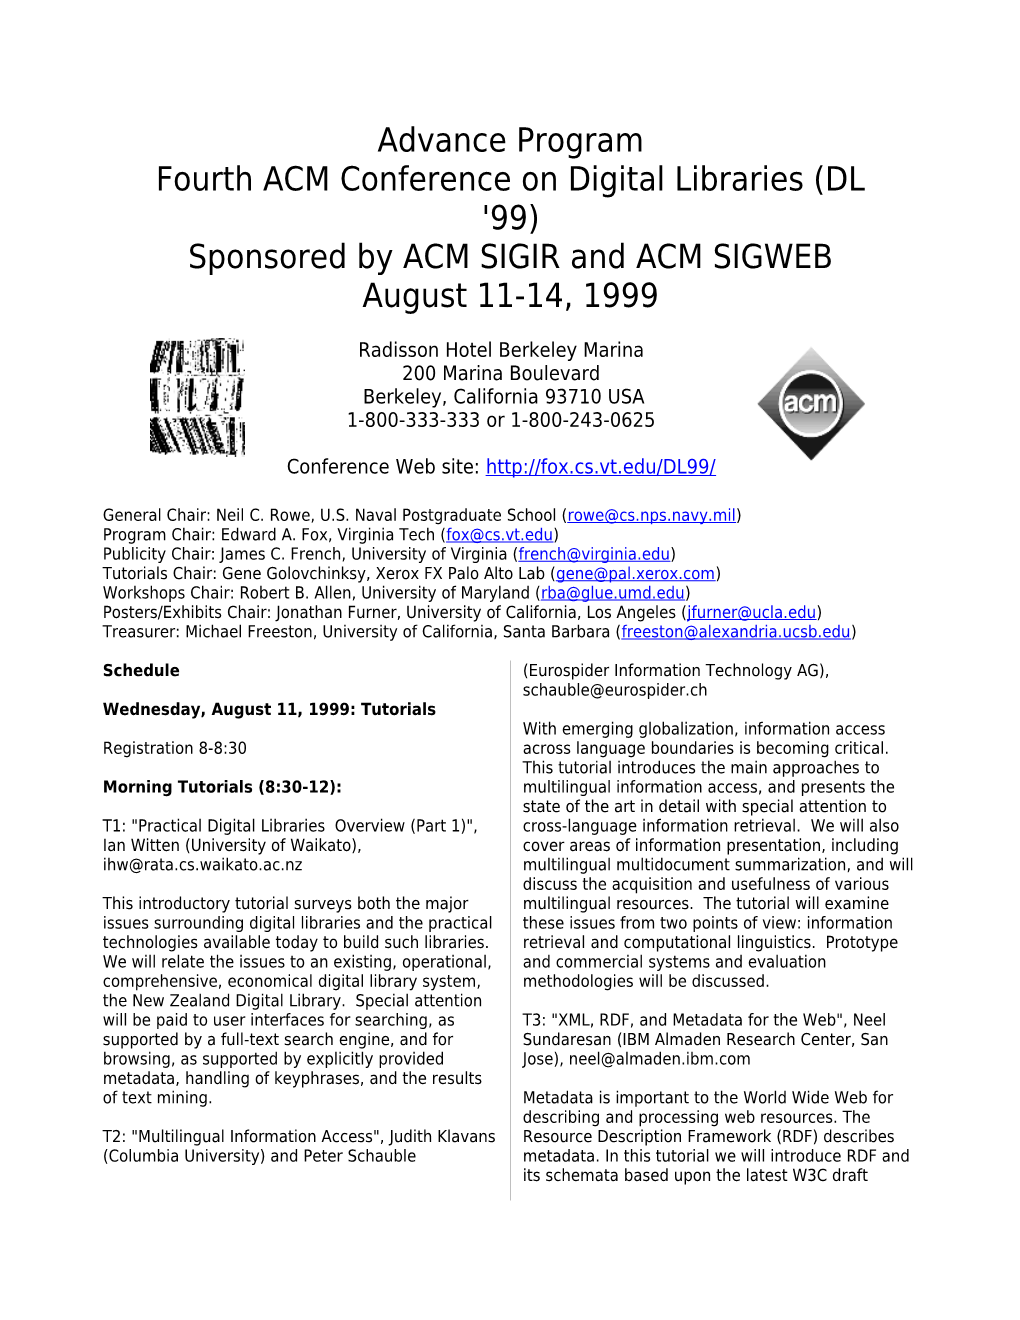 Fourth ACM Conference on Digital Libraries (DL '99)